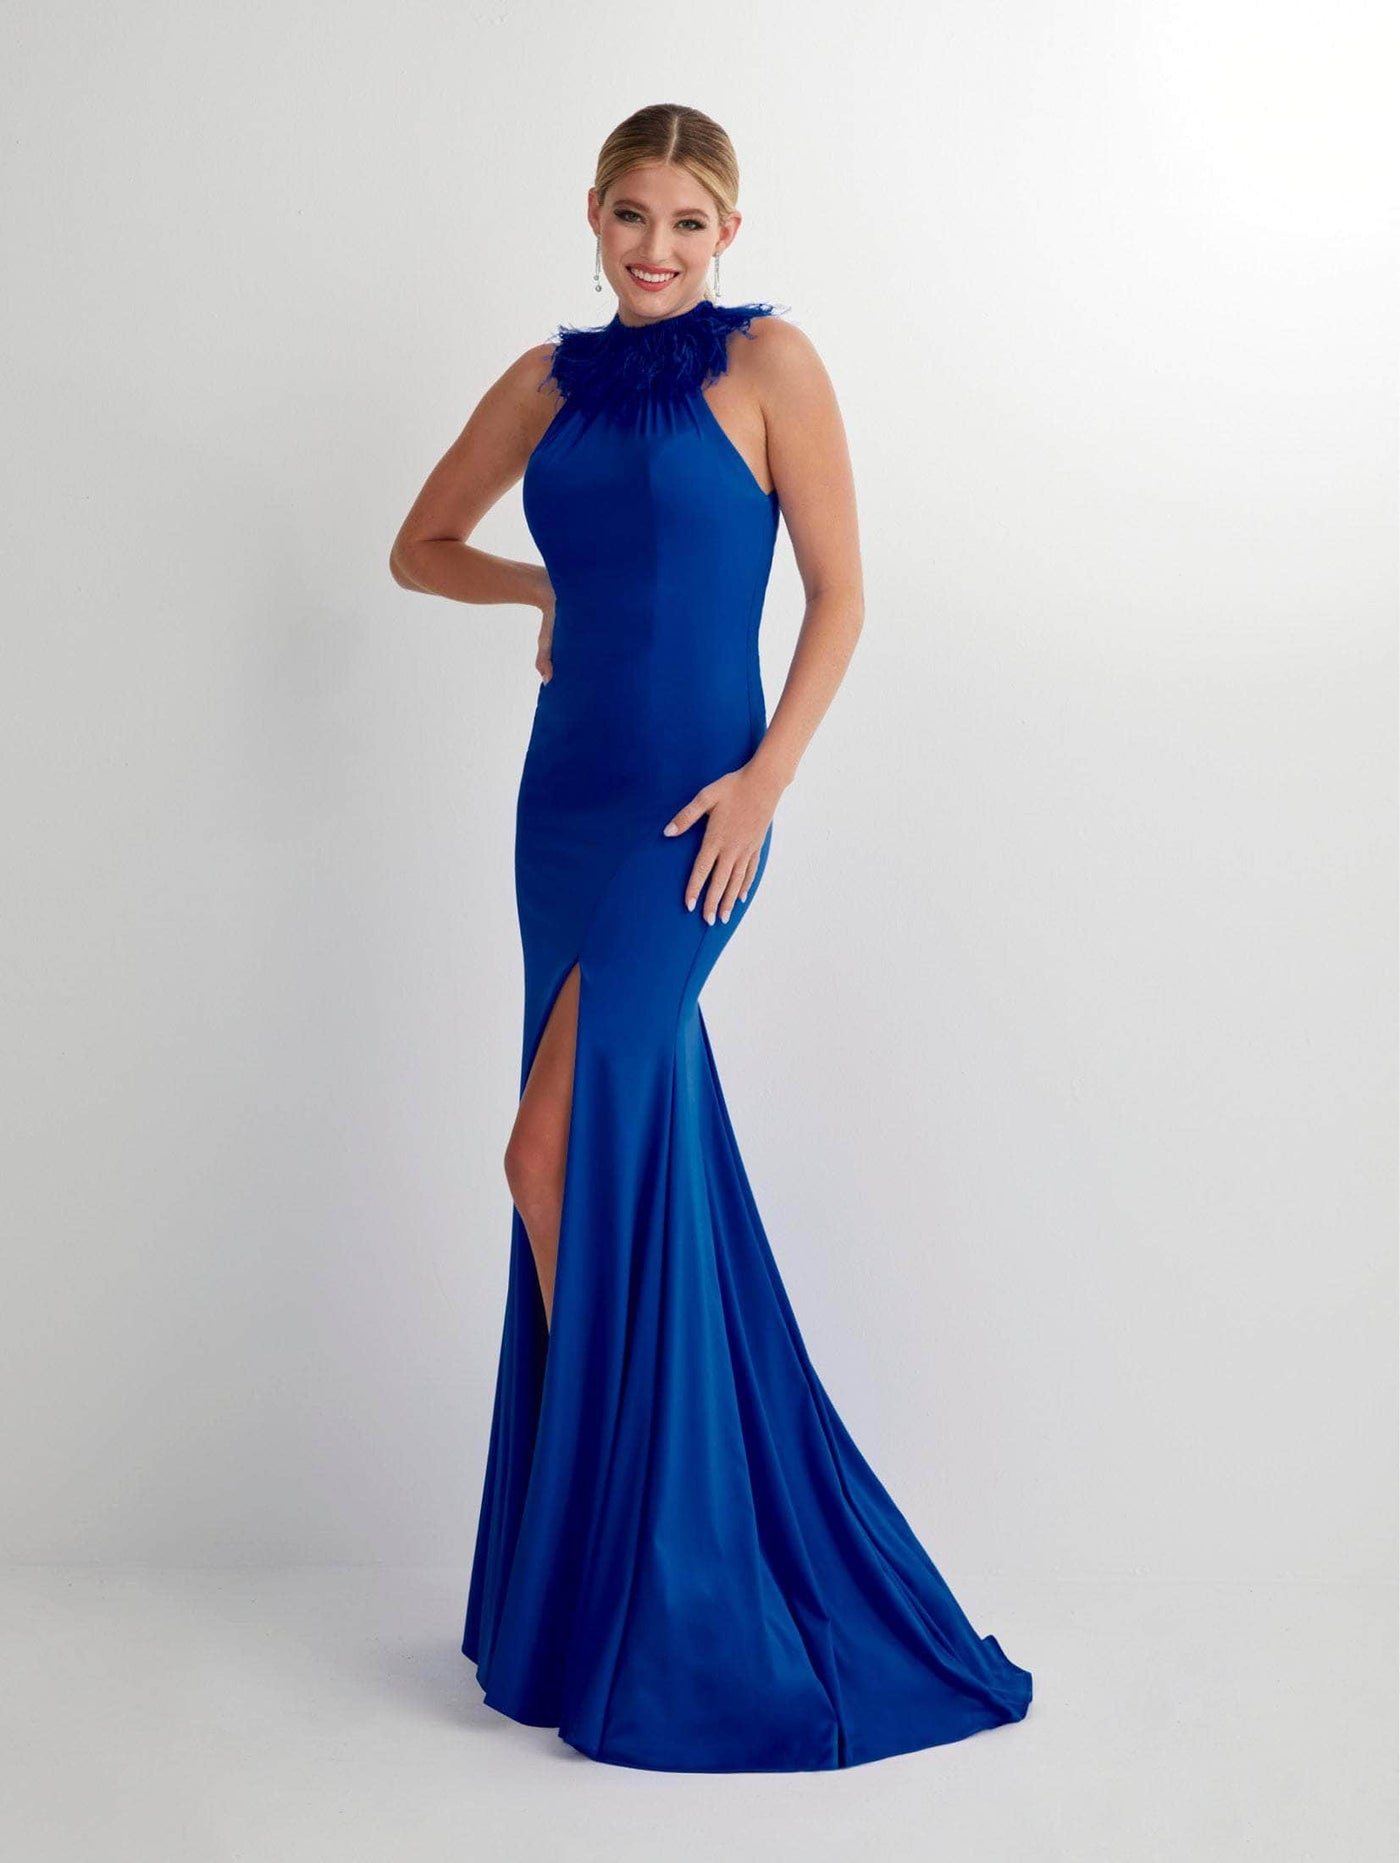 Studio 17 Prom 12913 - Feathered Halter Neck Evening Gown Special Occasion Dress